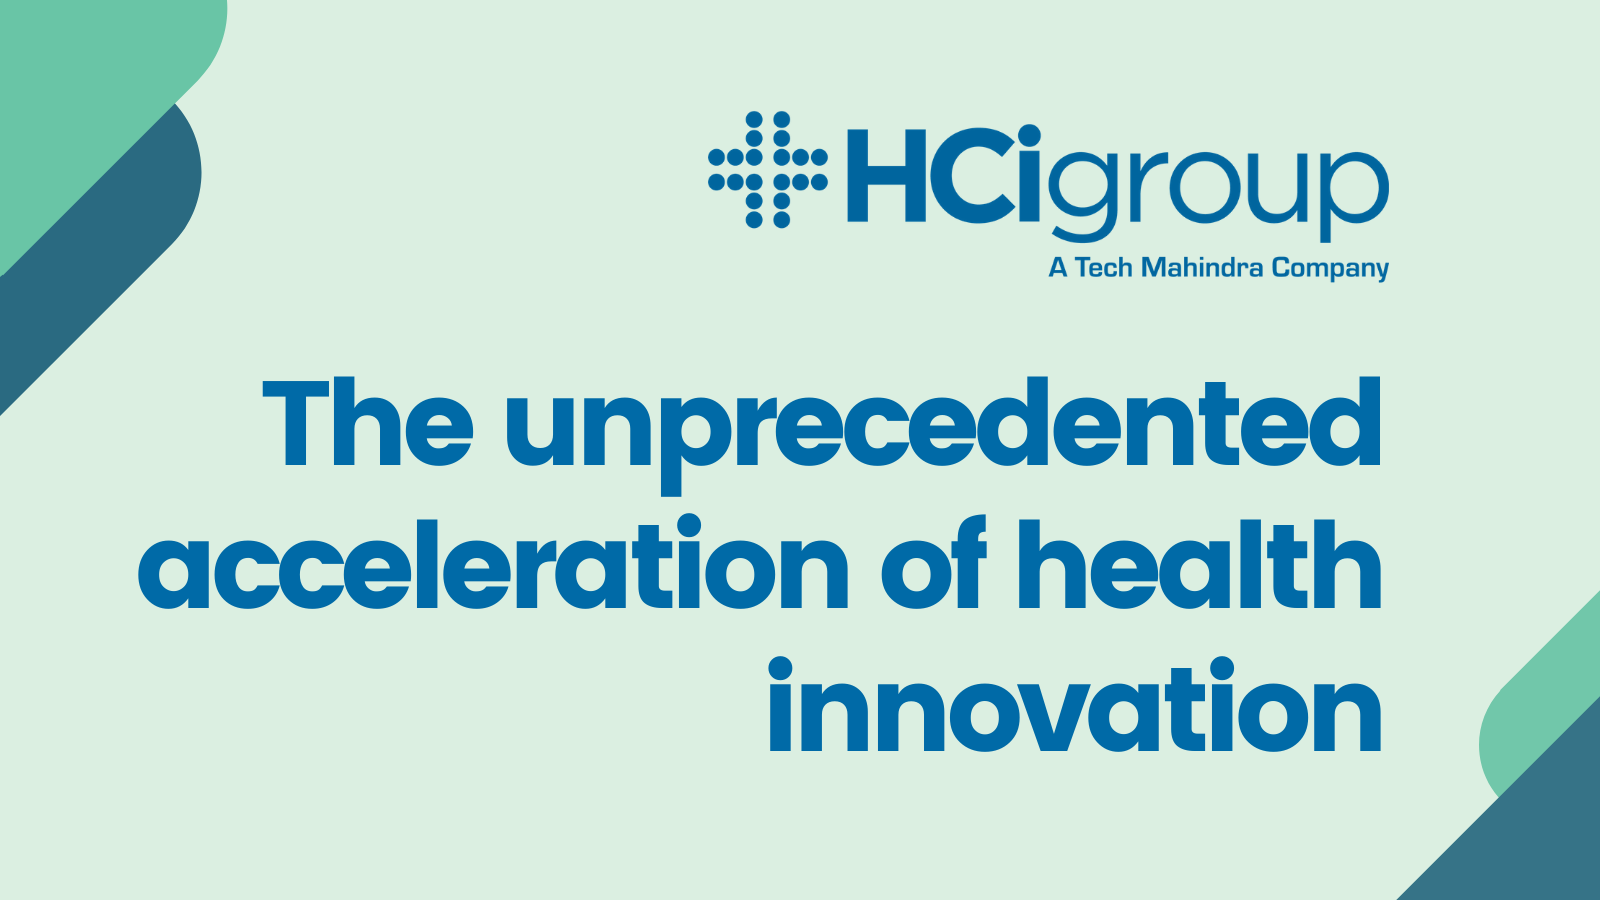 The unprecedented acceleration of health innovation